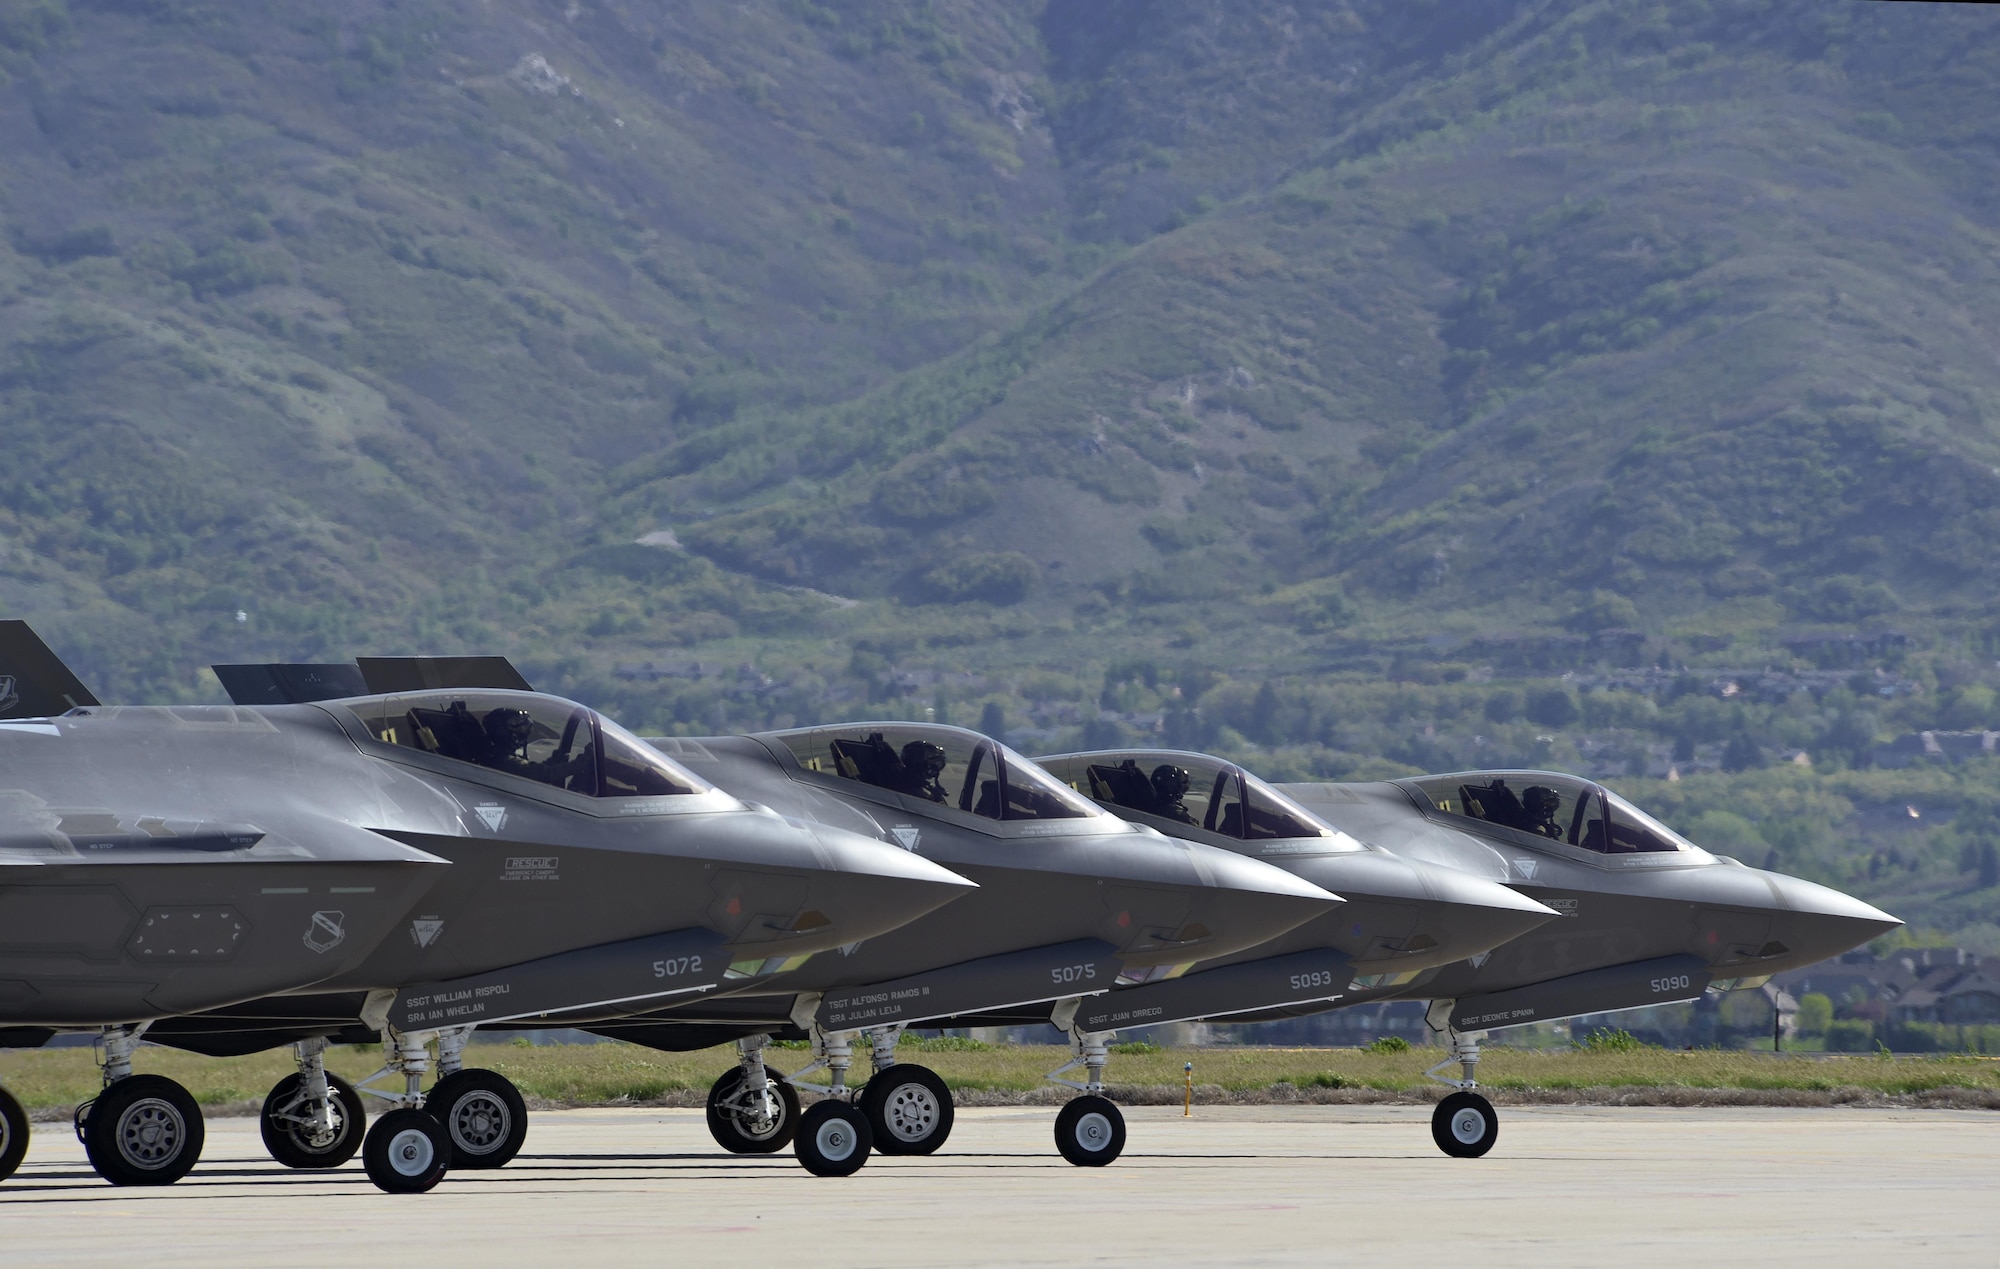 Four F-35 Lightning II aircraft prepare for takeoff at Hill Air Force Base, Utah, May 4. Hill's active duty and Reserve F-35 pilots recently began flying routine four-ship configurations, just as they would in combat. This marks a key milestone in getting the Air Force's newest fighter jet to reach Initial Operational Capability later this year, at which time it will be combat-ready. (U.S. Air Force photo/Paul Holcomb)